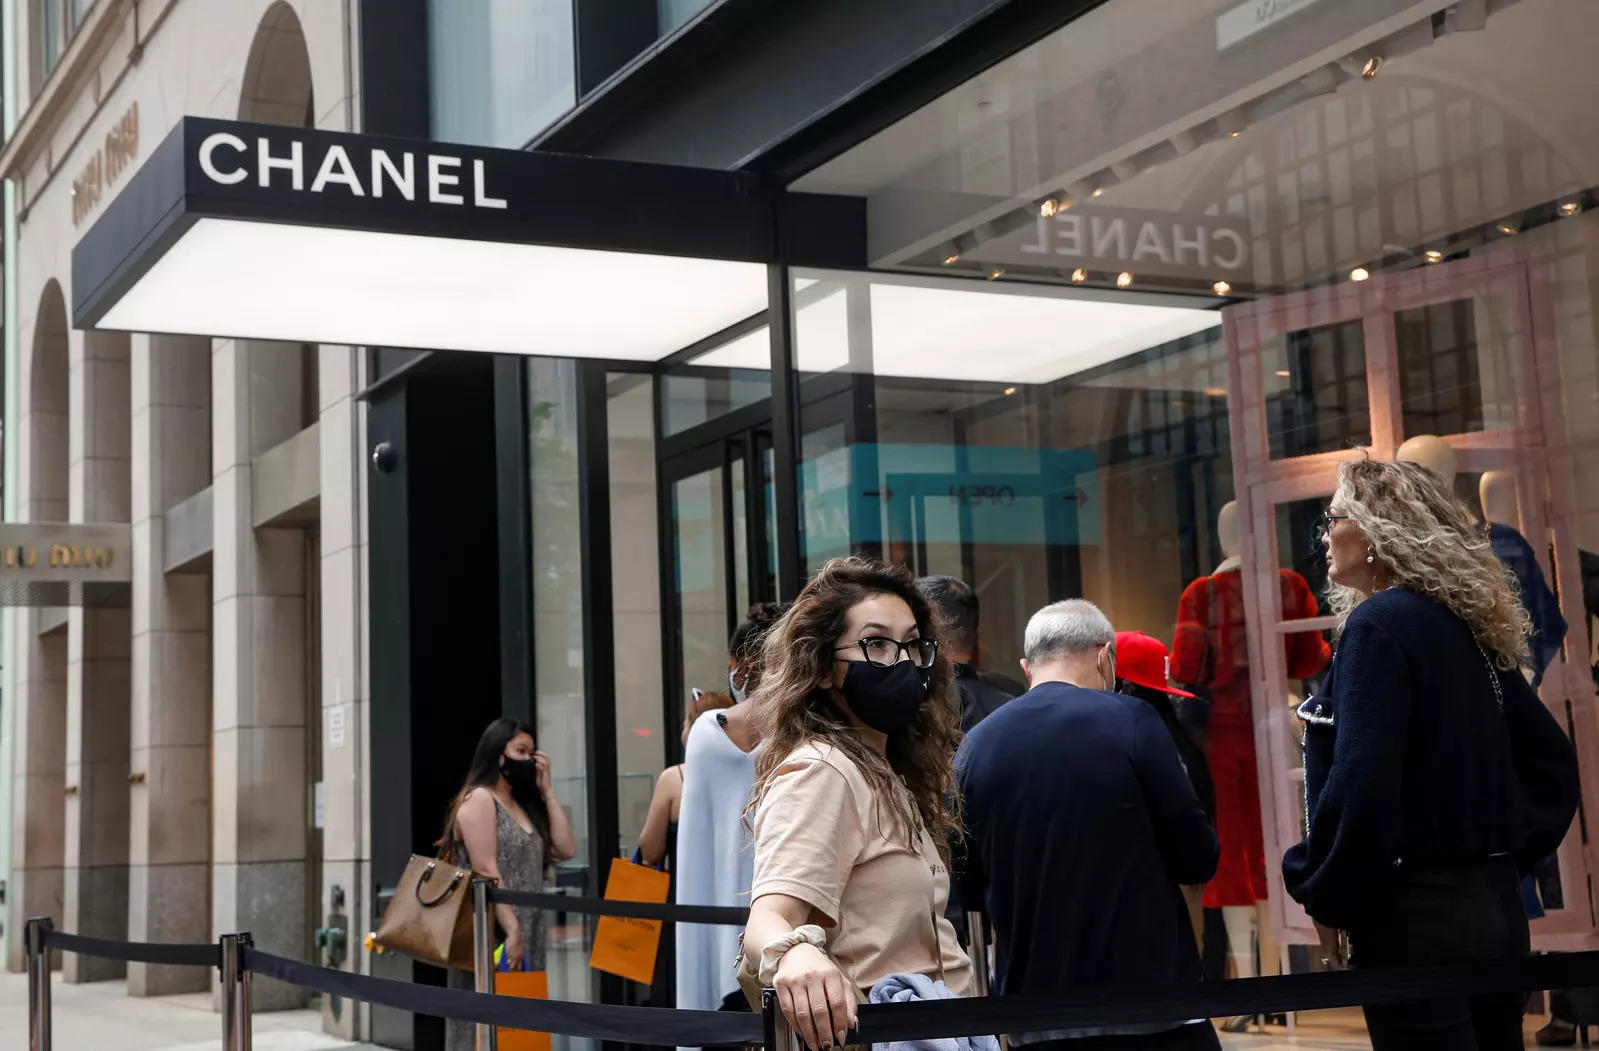 Luxury Brands: Chanel hikes handbag prices in run-up to Christmas, ET Retail